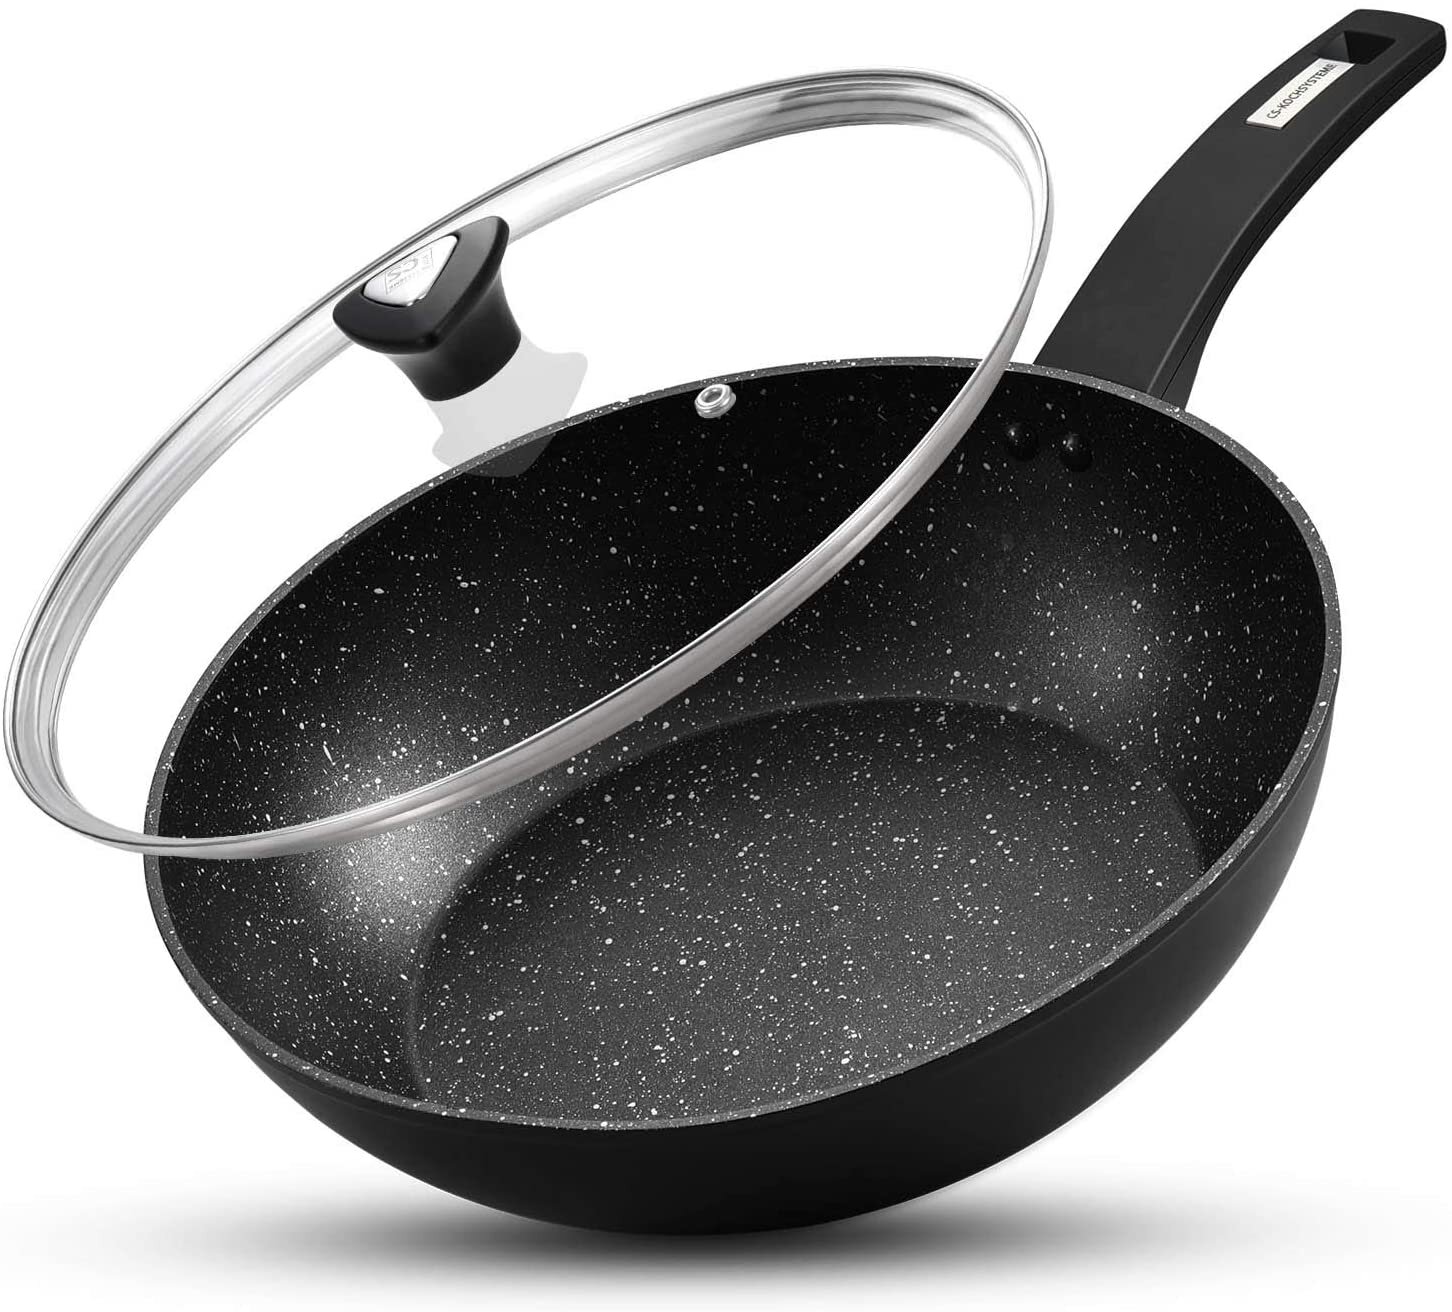 KOCH SYSTEME CS CSK 11 Inch Nonstick Wok Pan with Lid, Ceramic Wok pan with  Heat Insulation Handle, 100% APEO & PFOA-Free Non-Stick Coating, Skilllets